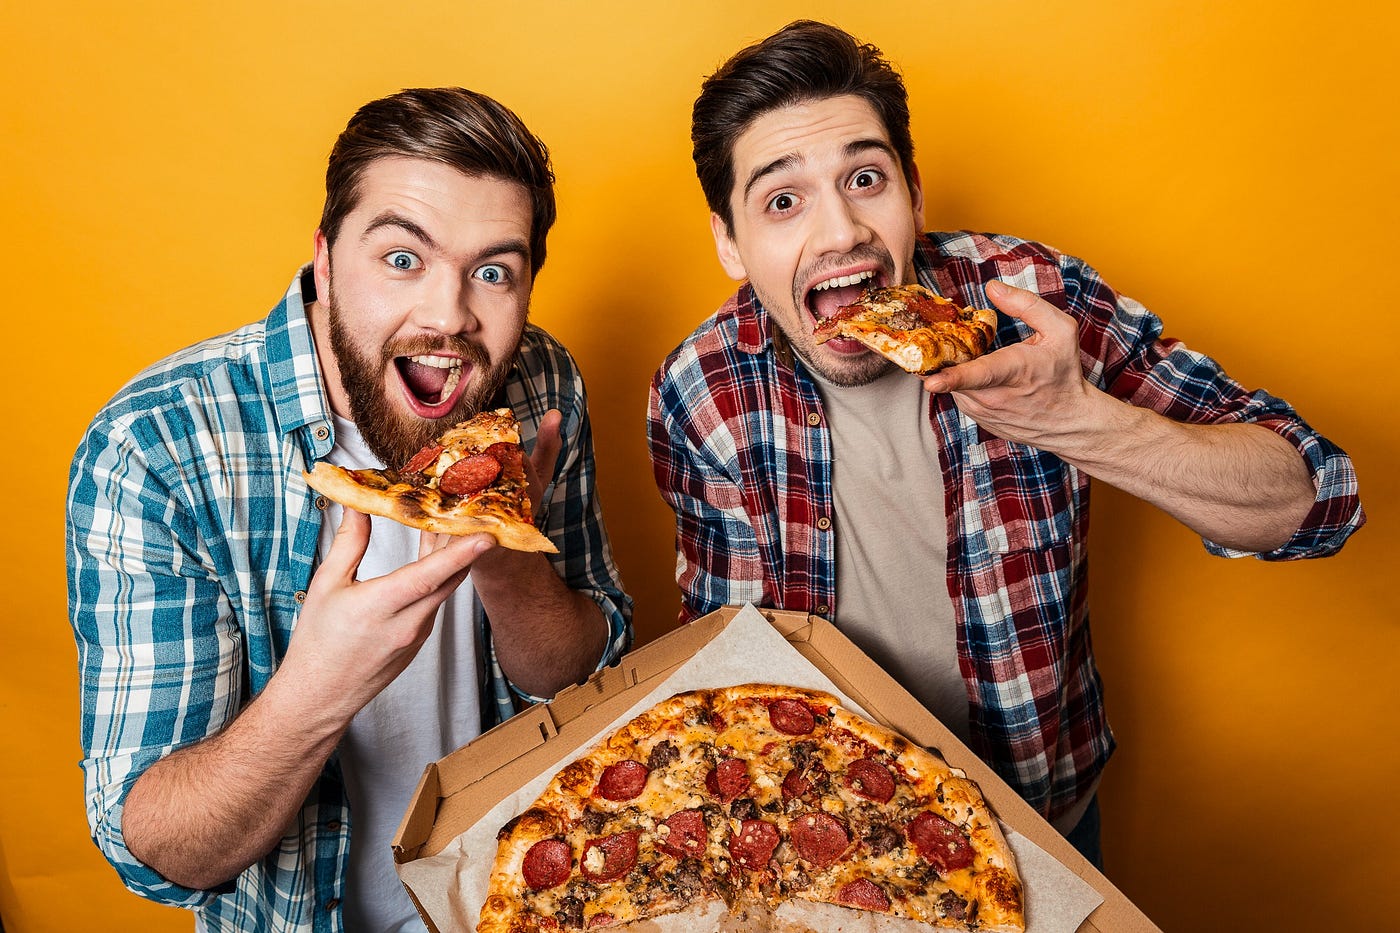 Craving Pizza on a Budget? Here’s How to Find the Best Pizza Deals Near Me